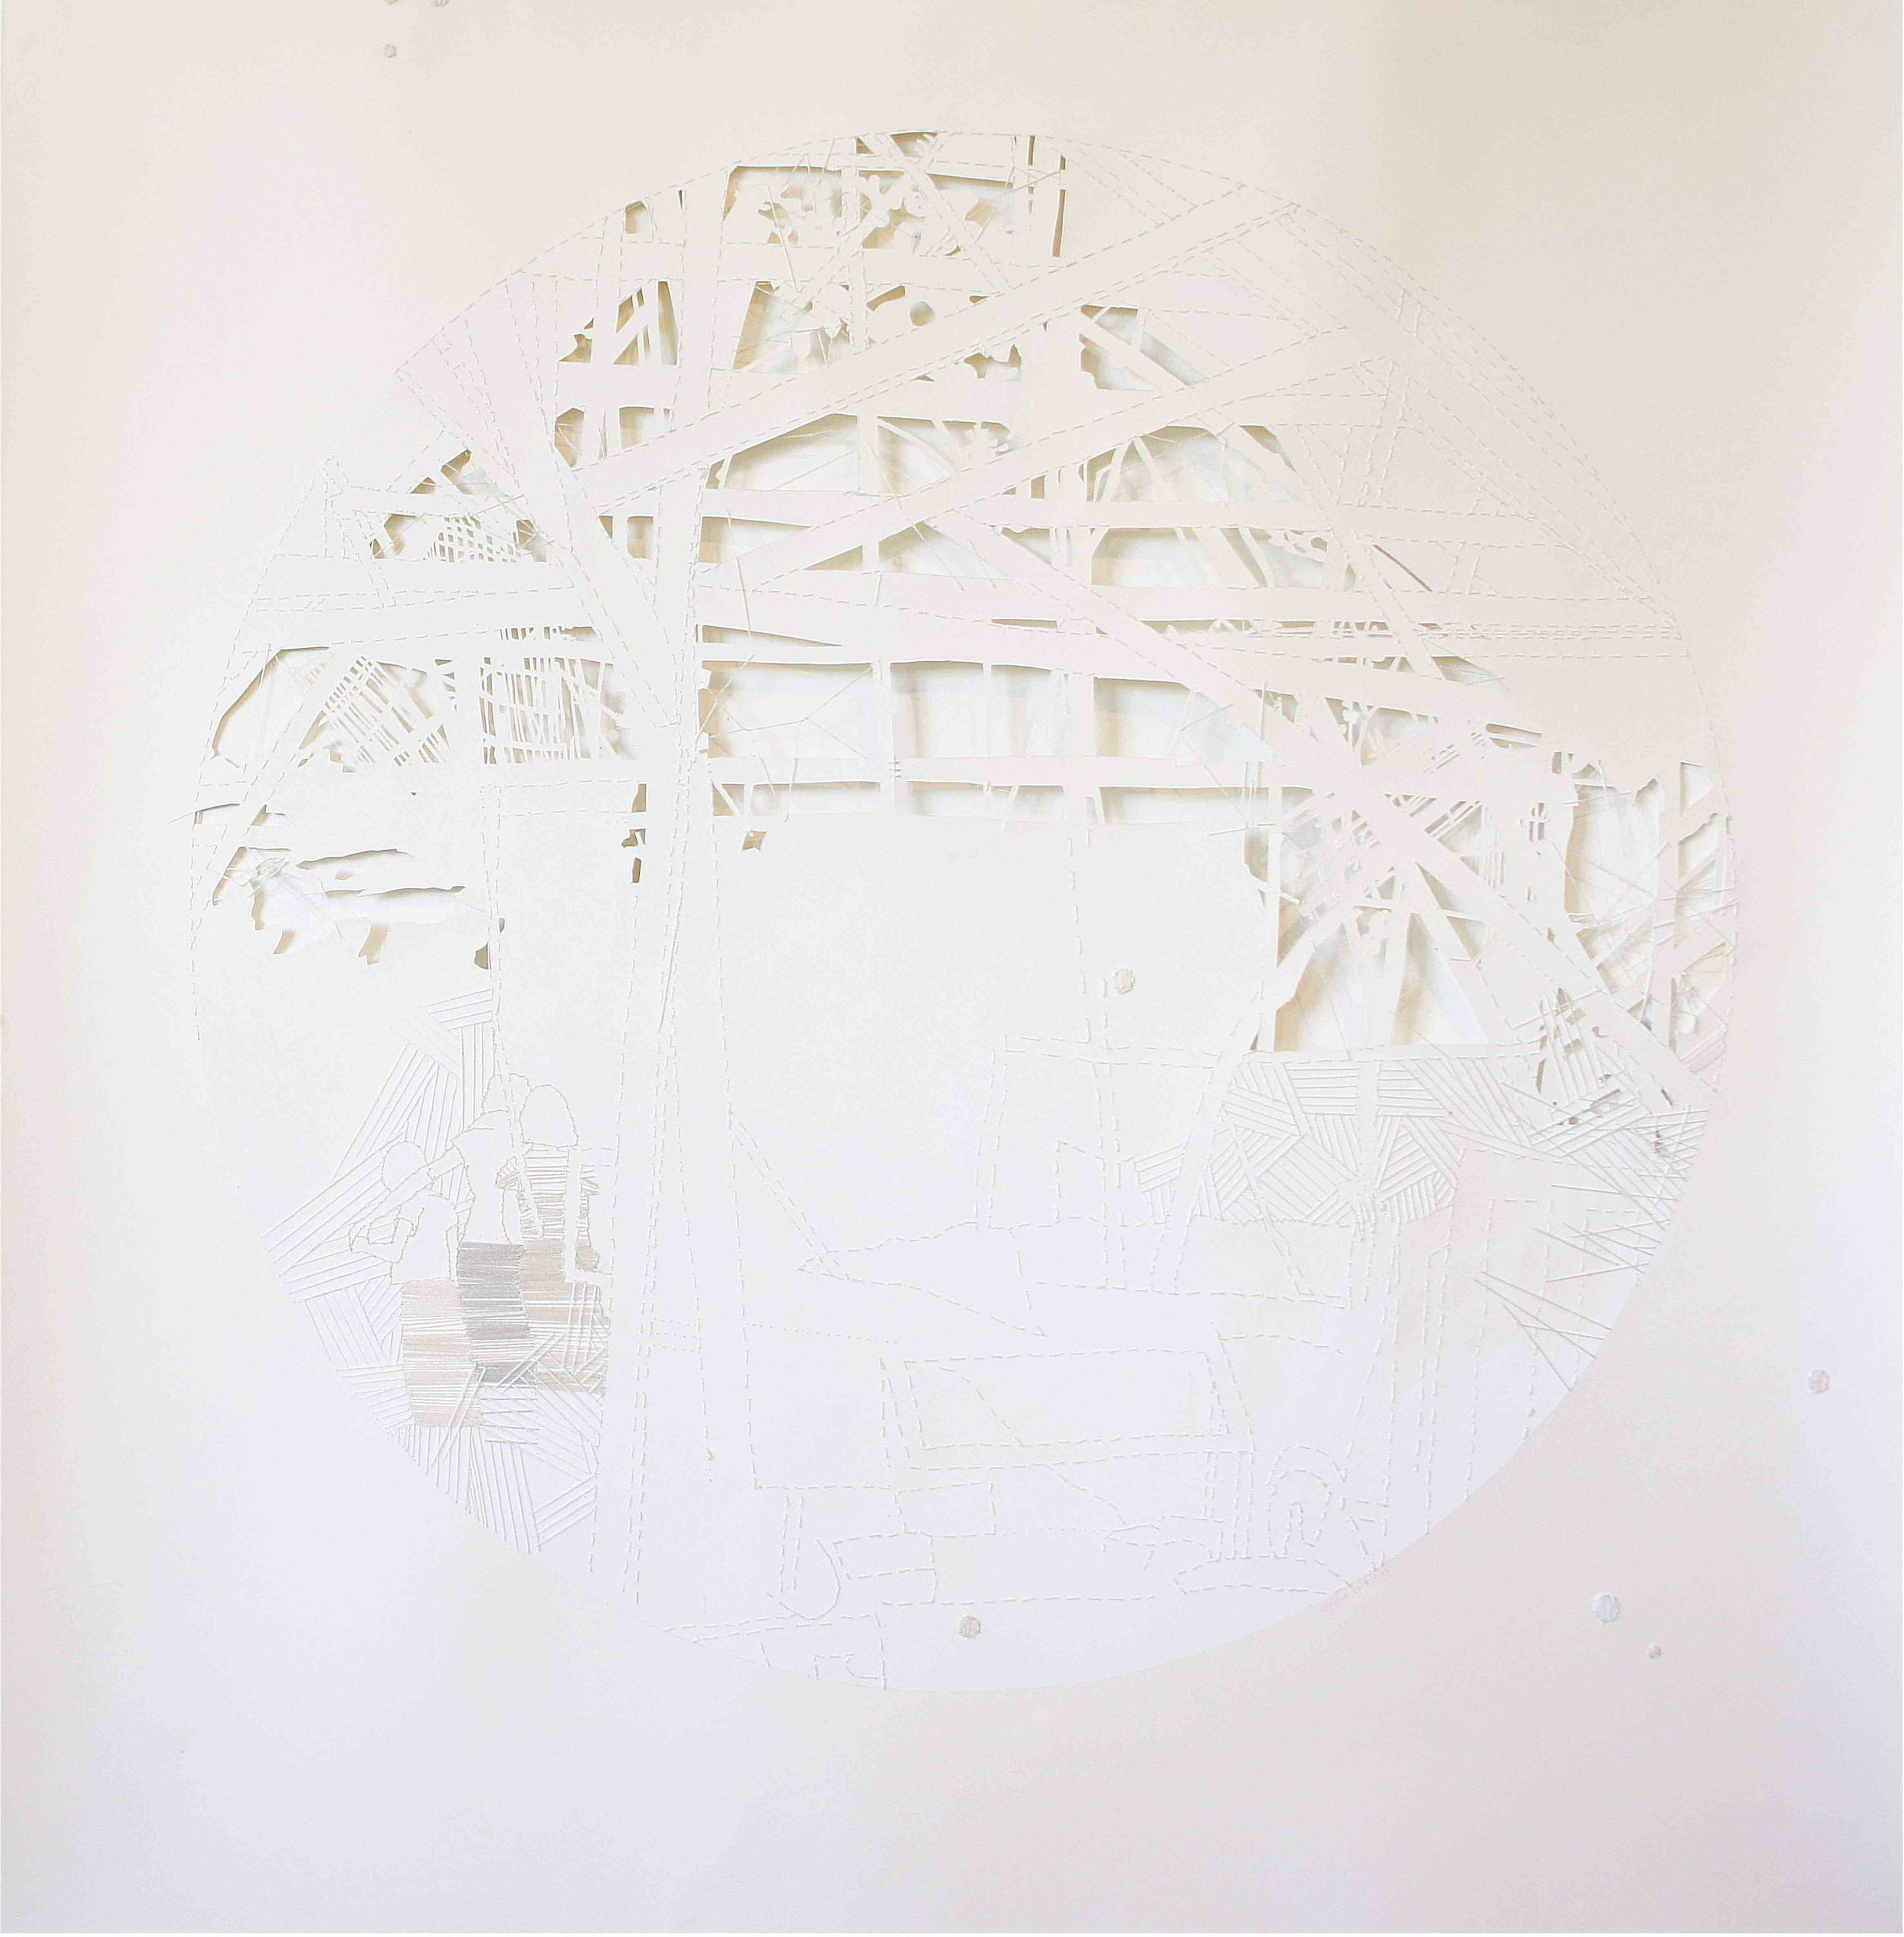 Amanda Humphries, Shell Painting (Shelter)  Paper cut out, gouache and thread on paper  108 cm x 104.5 cm  2018